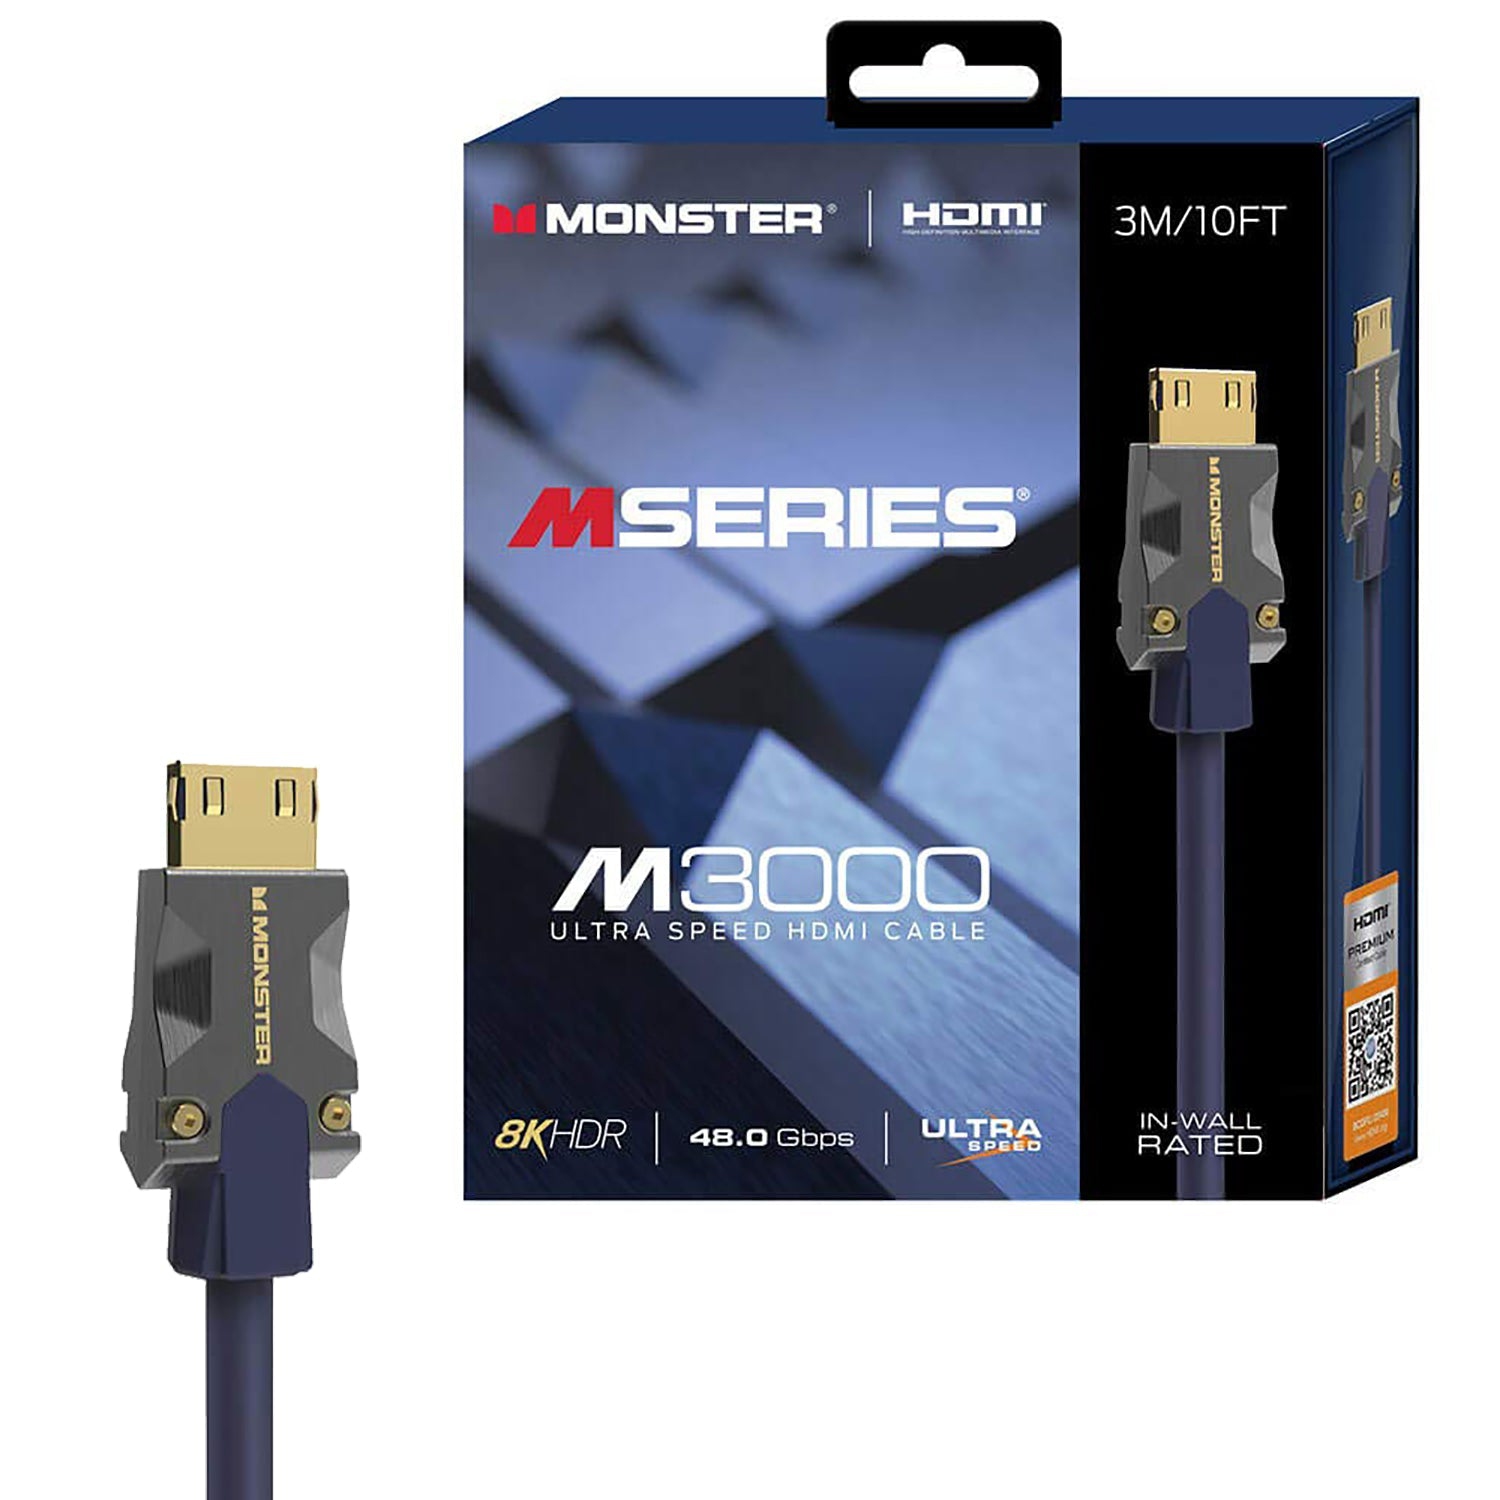 Monster - M Series M 3000 High Speed HDMI Cable, 48GBPS, 10 Feet Length, Blue